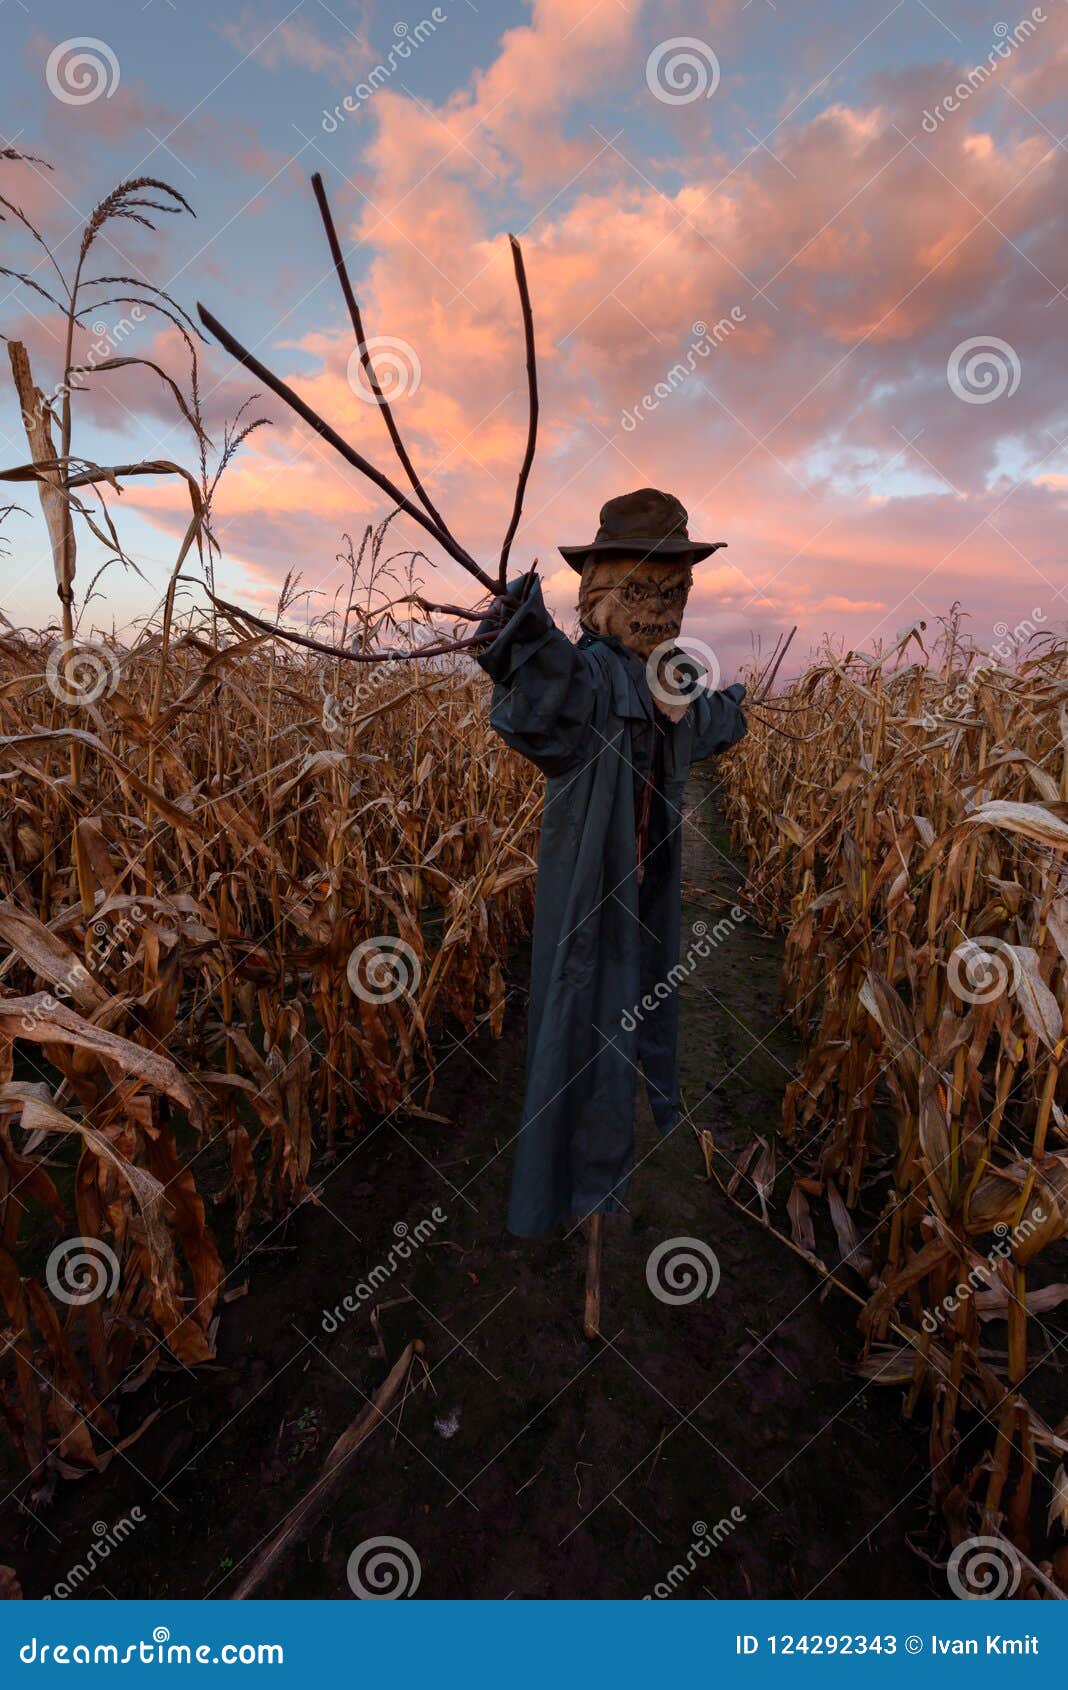 Scary scarecrow in a hat stock image. Image of fear - 124292343